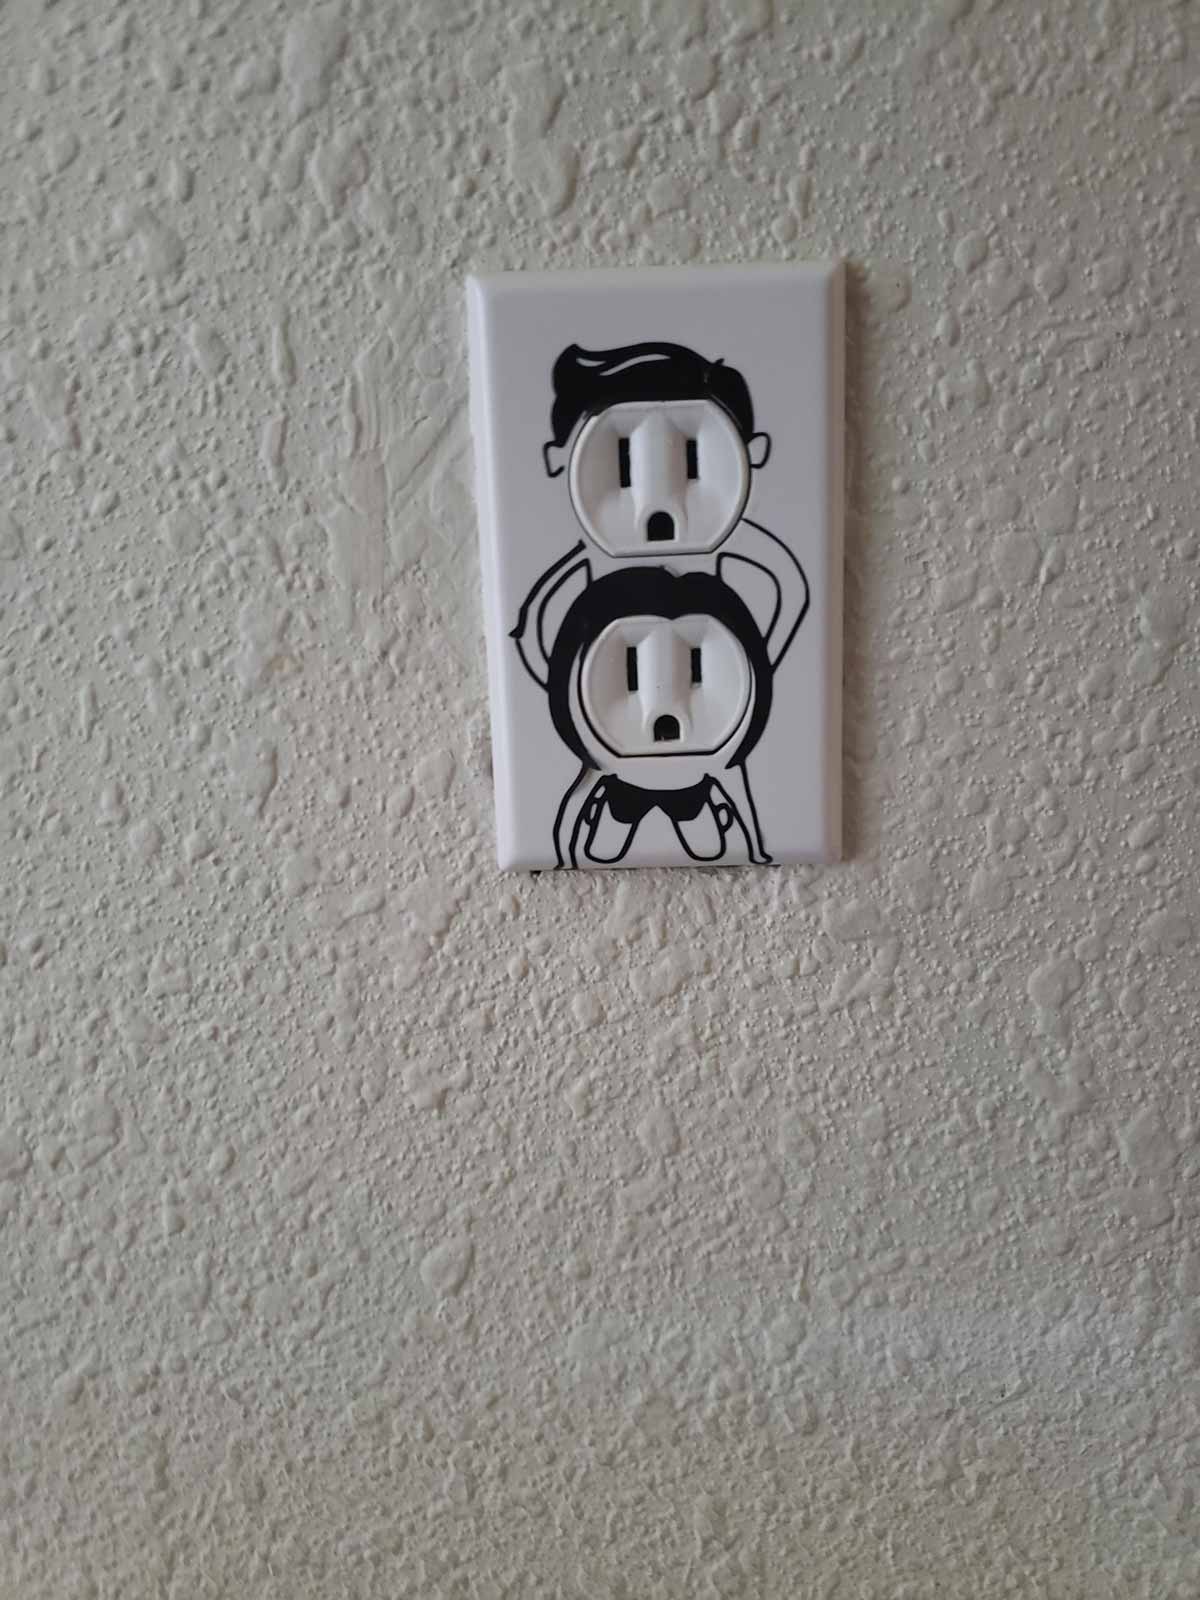 Funny electrical wall outlet where it's drawn to look like people having sex'